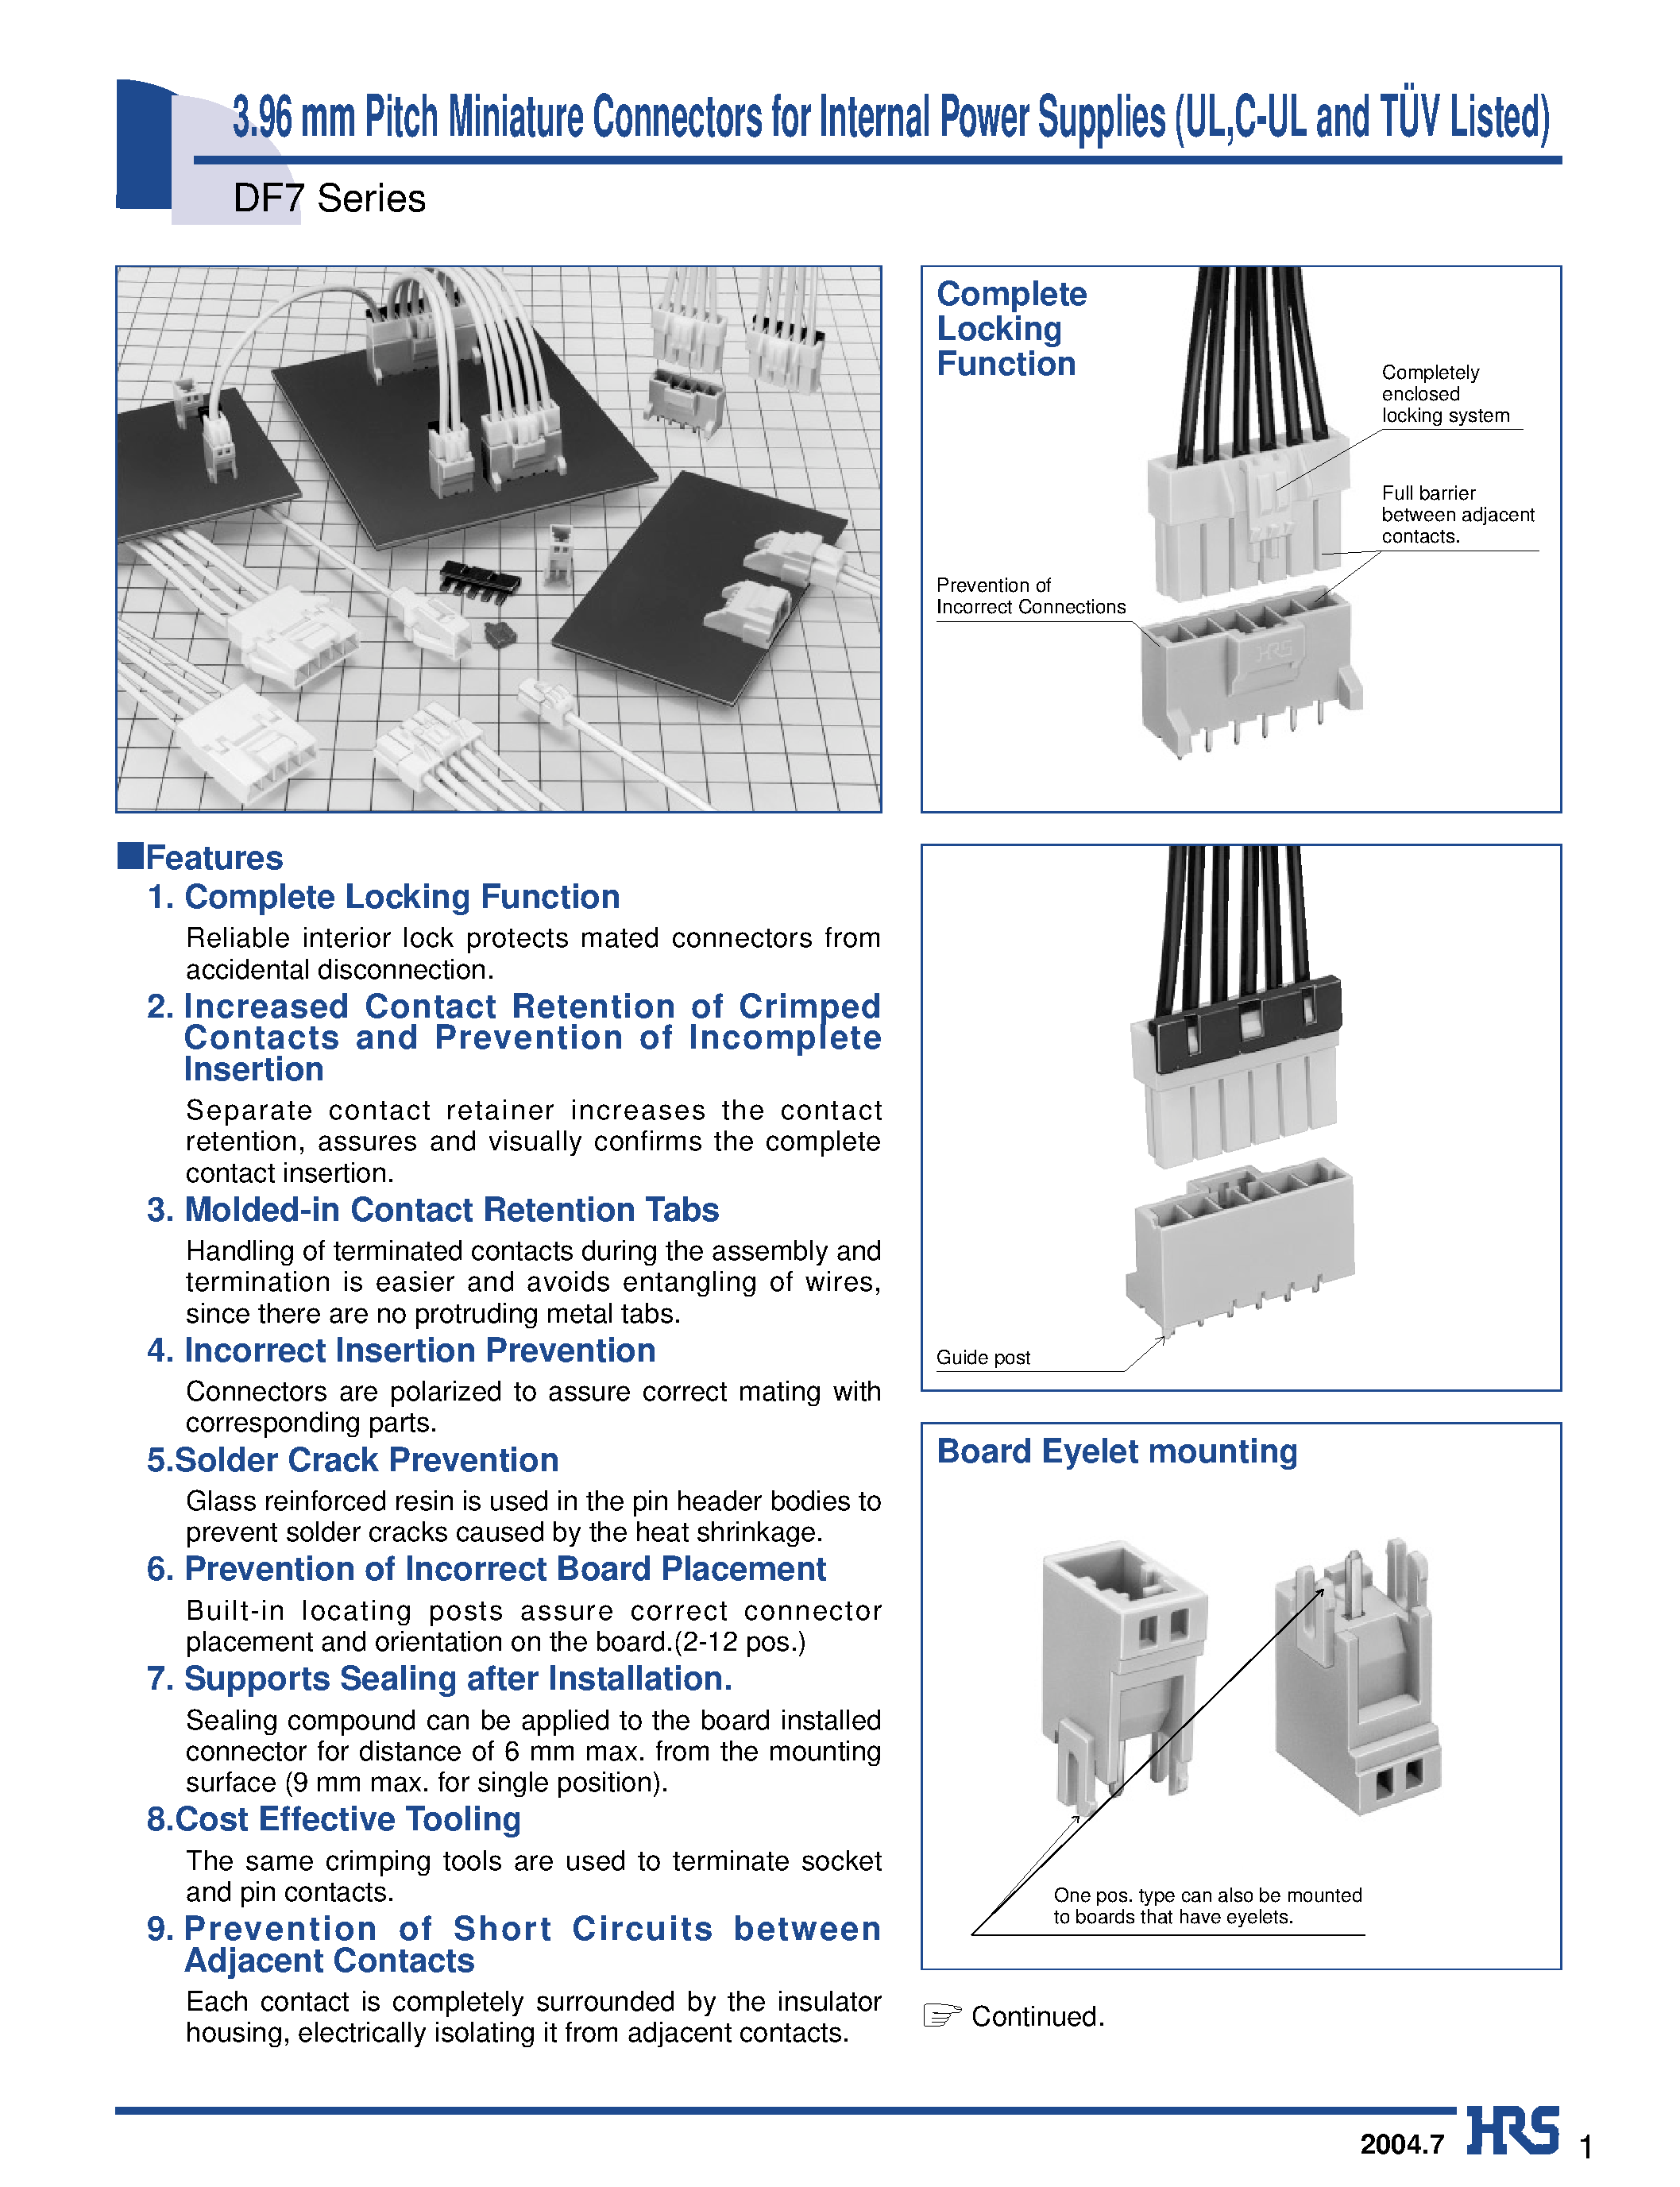 Datasheet DF7-4EP-3.96C - 3.96 mm Pitch Miniature Connectors for Internal Power Supplies (UL /C-UL and TUV Listed) page 1